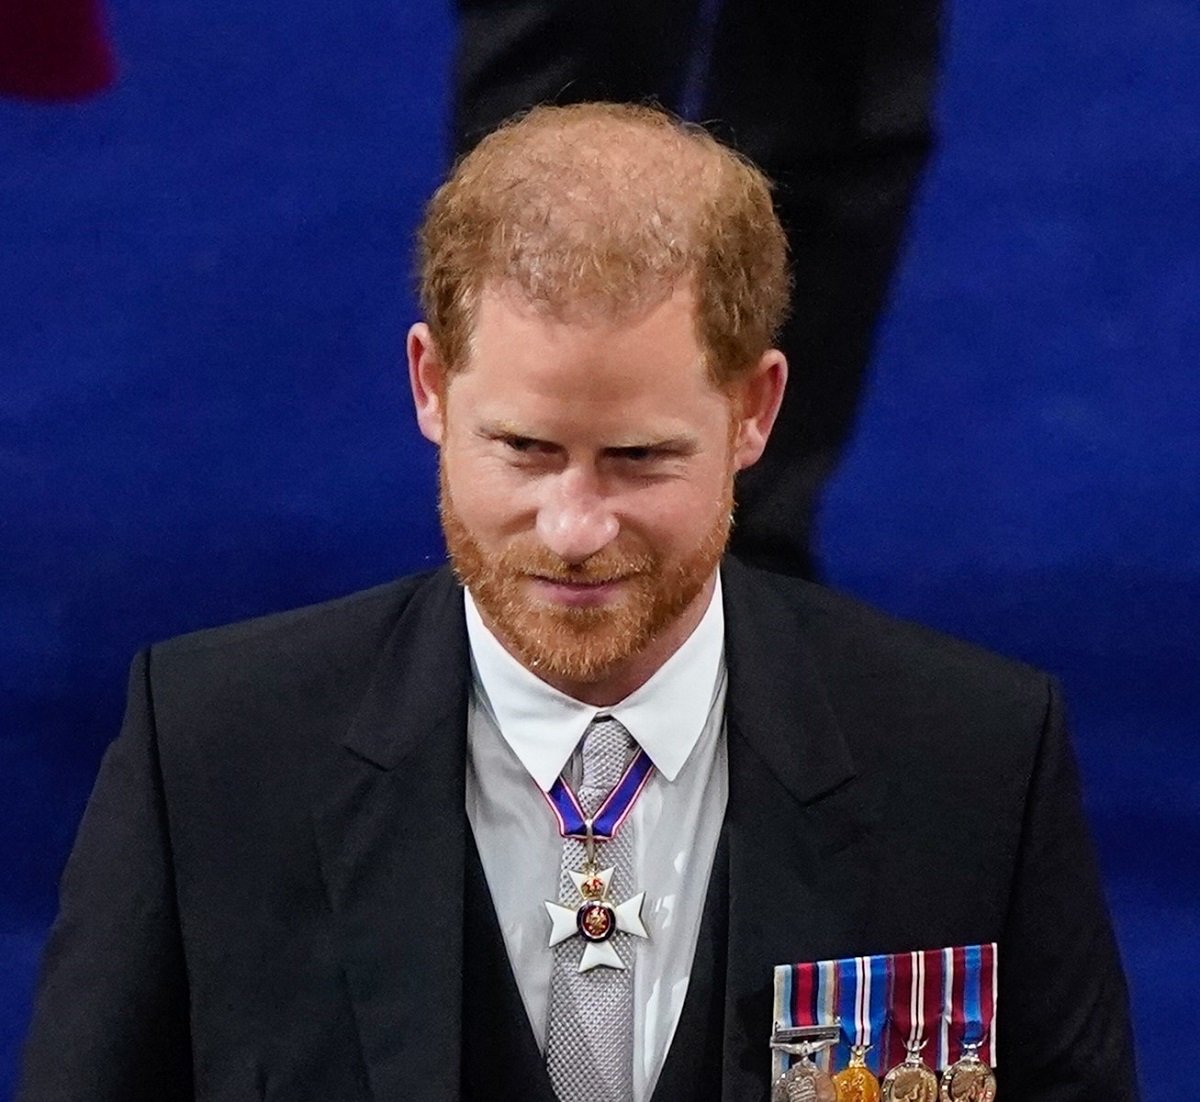 Prince Harry, who a body language observed acting "cocky,", arrives for King Charles III's coronation ceremony at Westminster Abbey